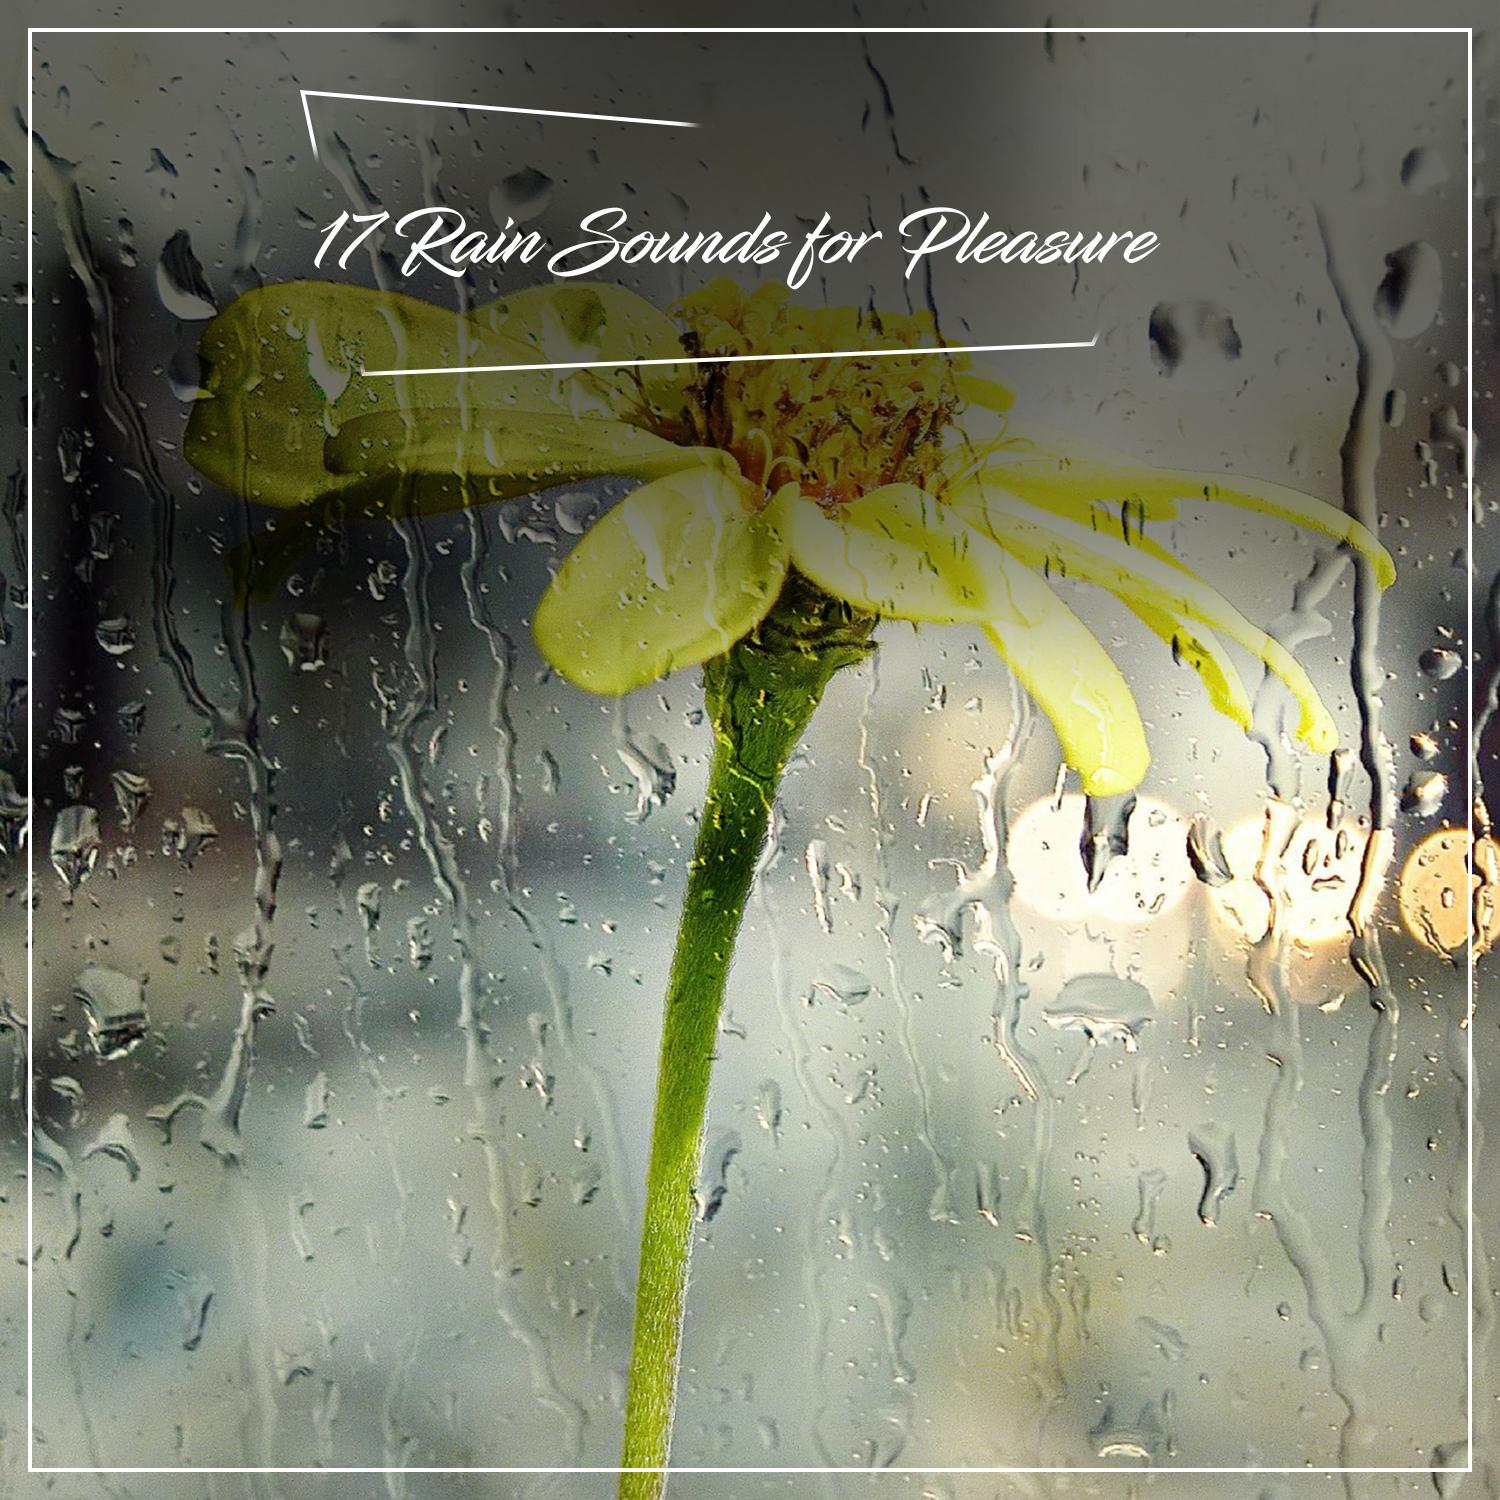 17 Rain Sounds for Pleasure - Relaxing Sounds of Rainfall